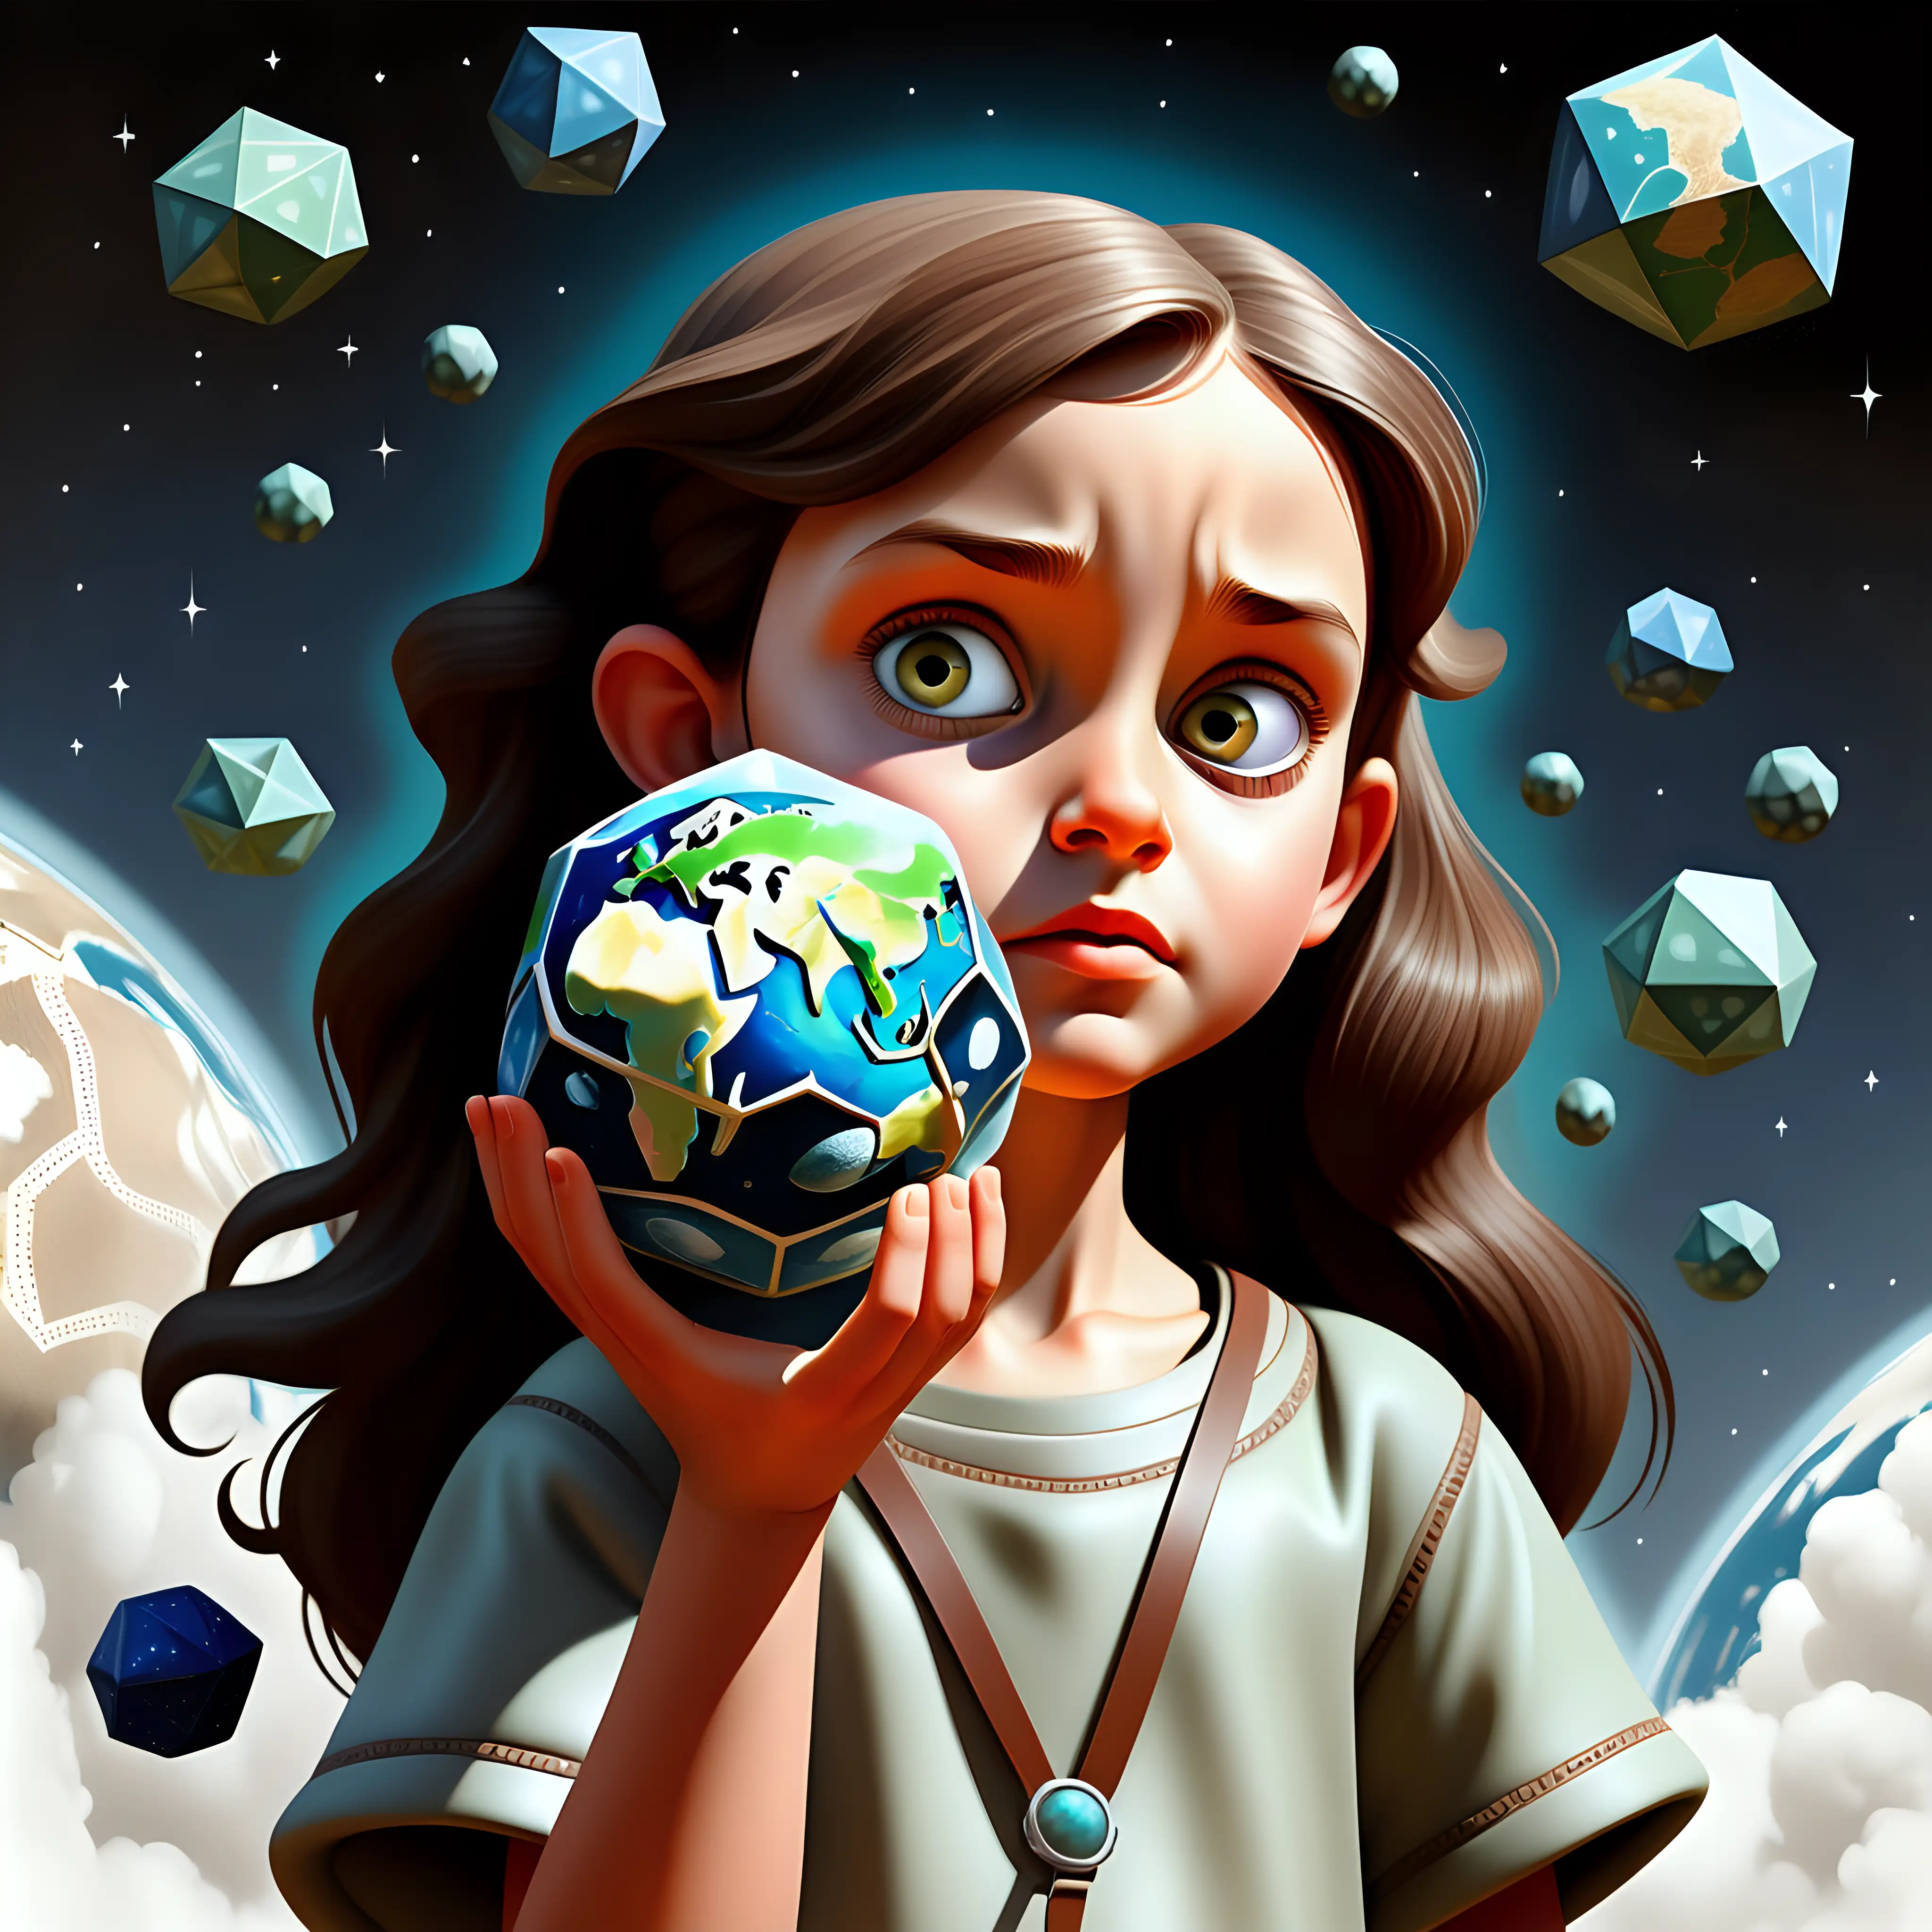 10 year-old girl who looks like Joslyn Arwen Reed, in the sky looking at the earth shaped as an dodecahedron, matrix, children's picture book, illustration, on a white background